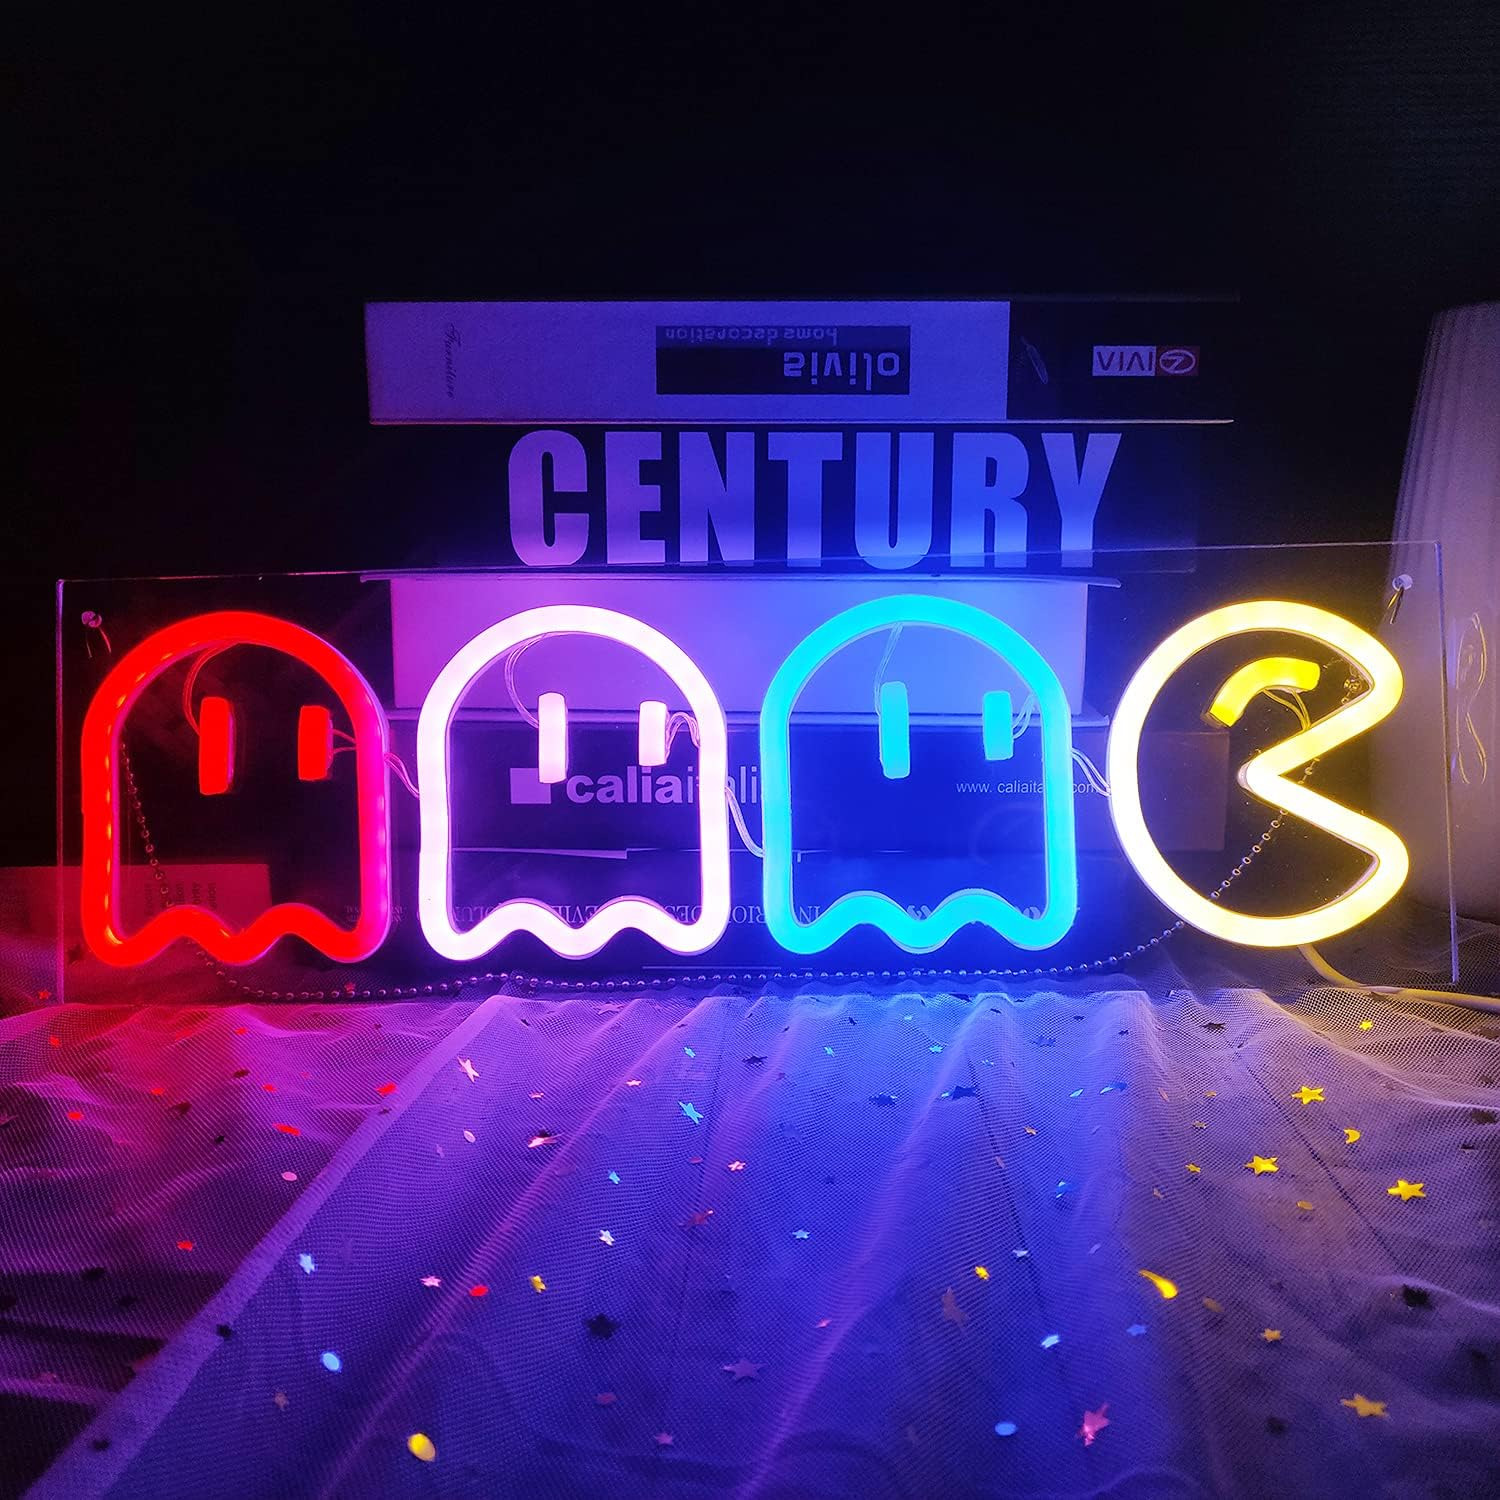 Game Neon Signs Ghost Neon Lights Led Sign Retro Decor Arcade for Game Room Deco